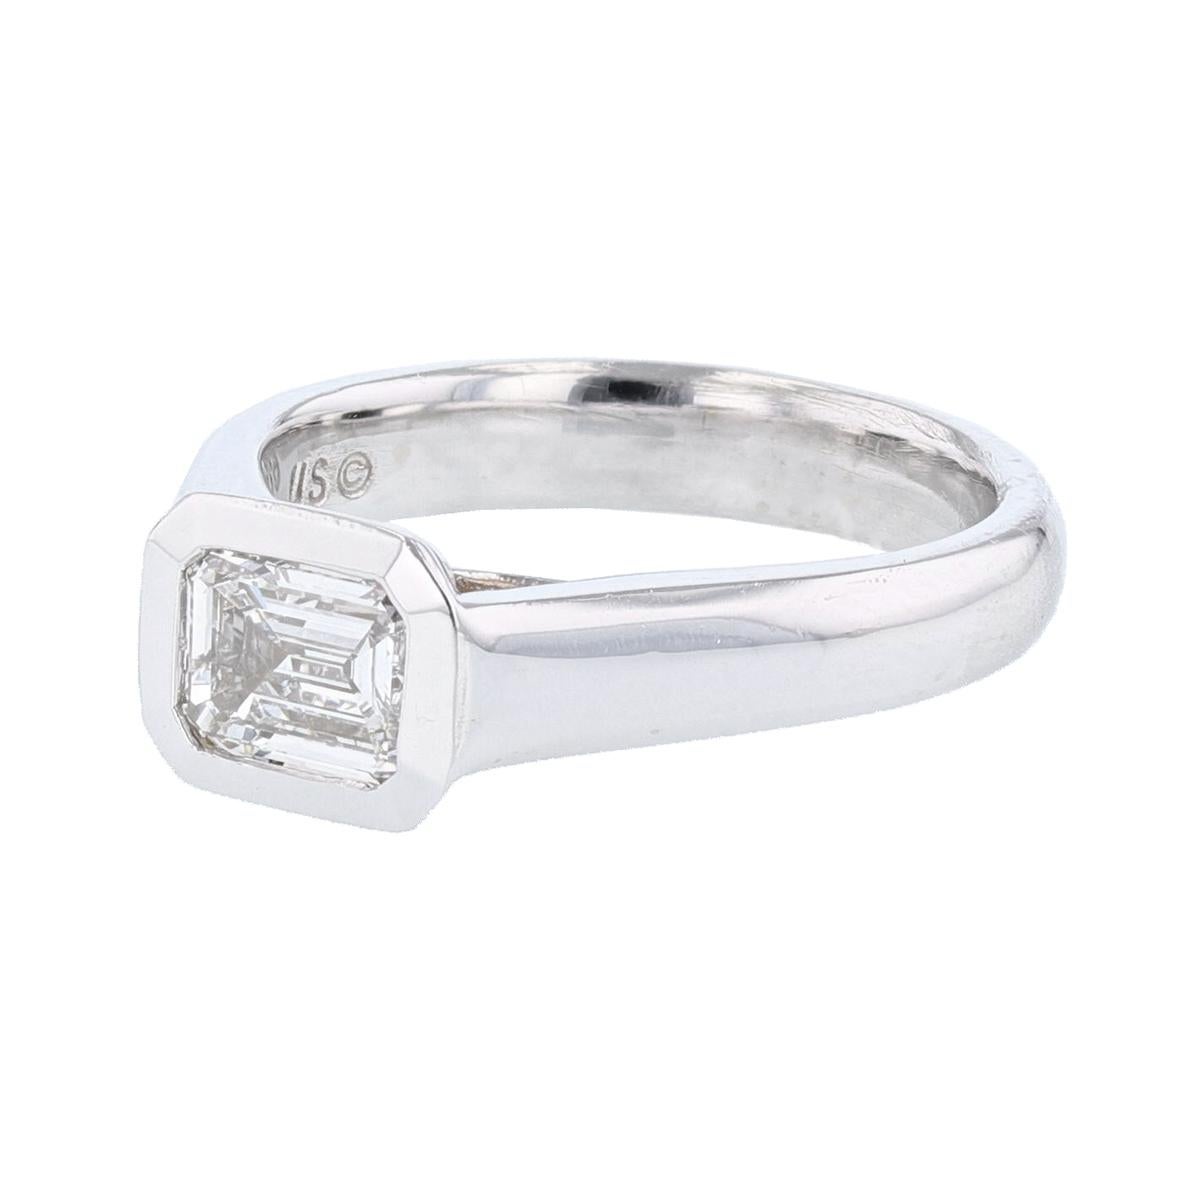 This ring is made with 14 karat white gold and features a bezel set  1.01ct  IGI certified emerald cut diamond (IGI certification number 9209818), with a color grade (E) and clarity grade (SI2). 